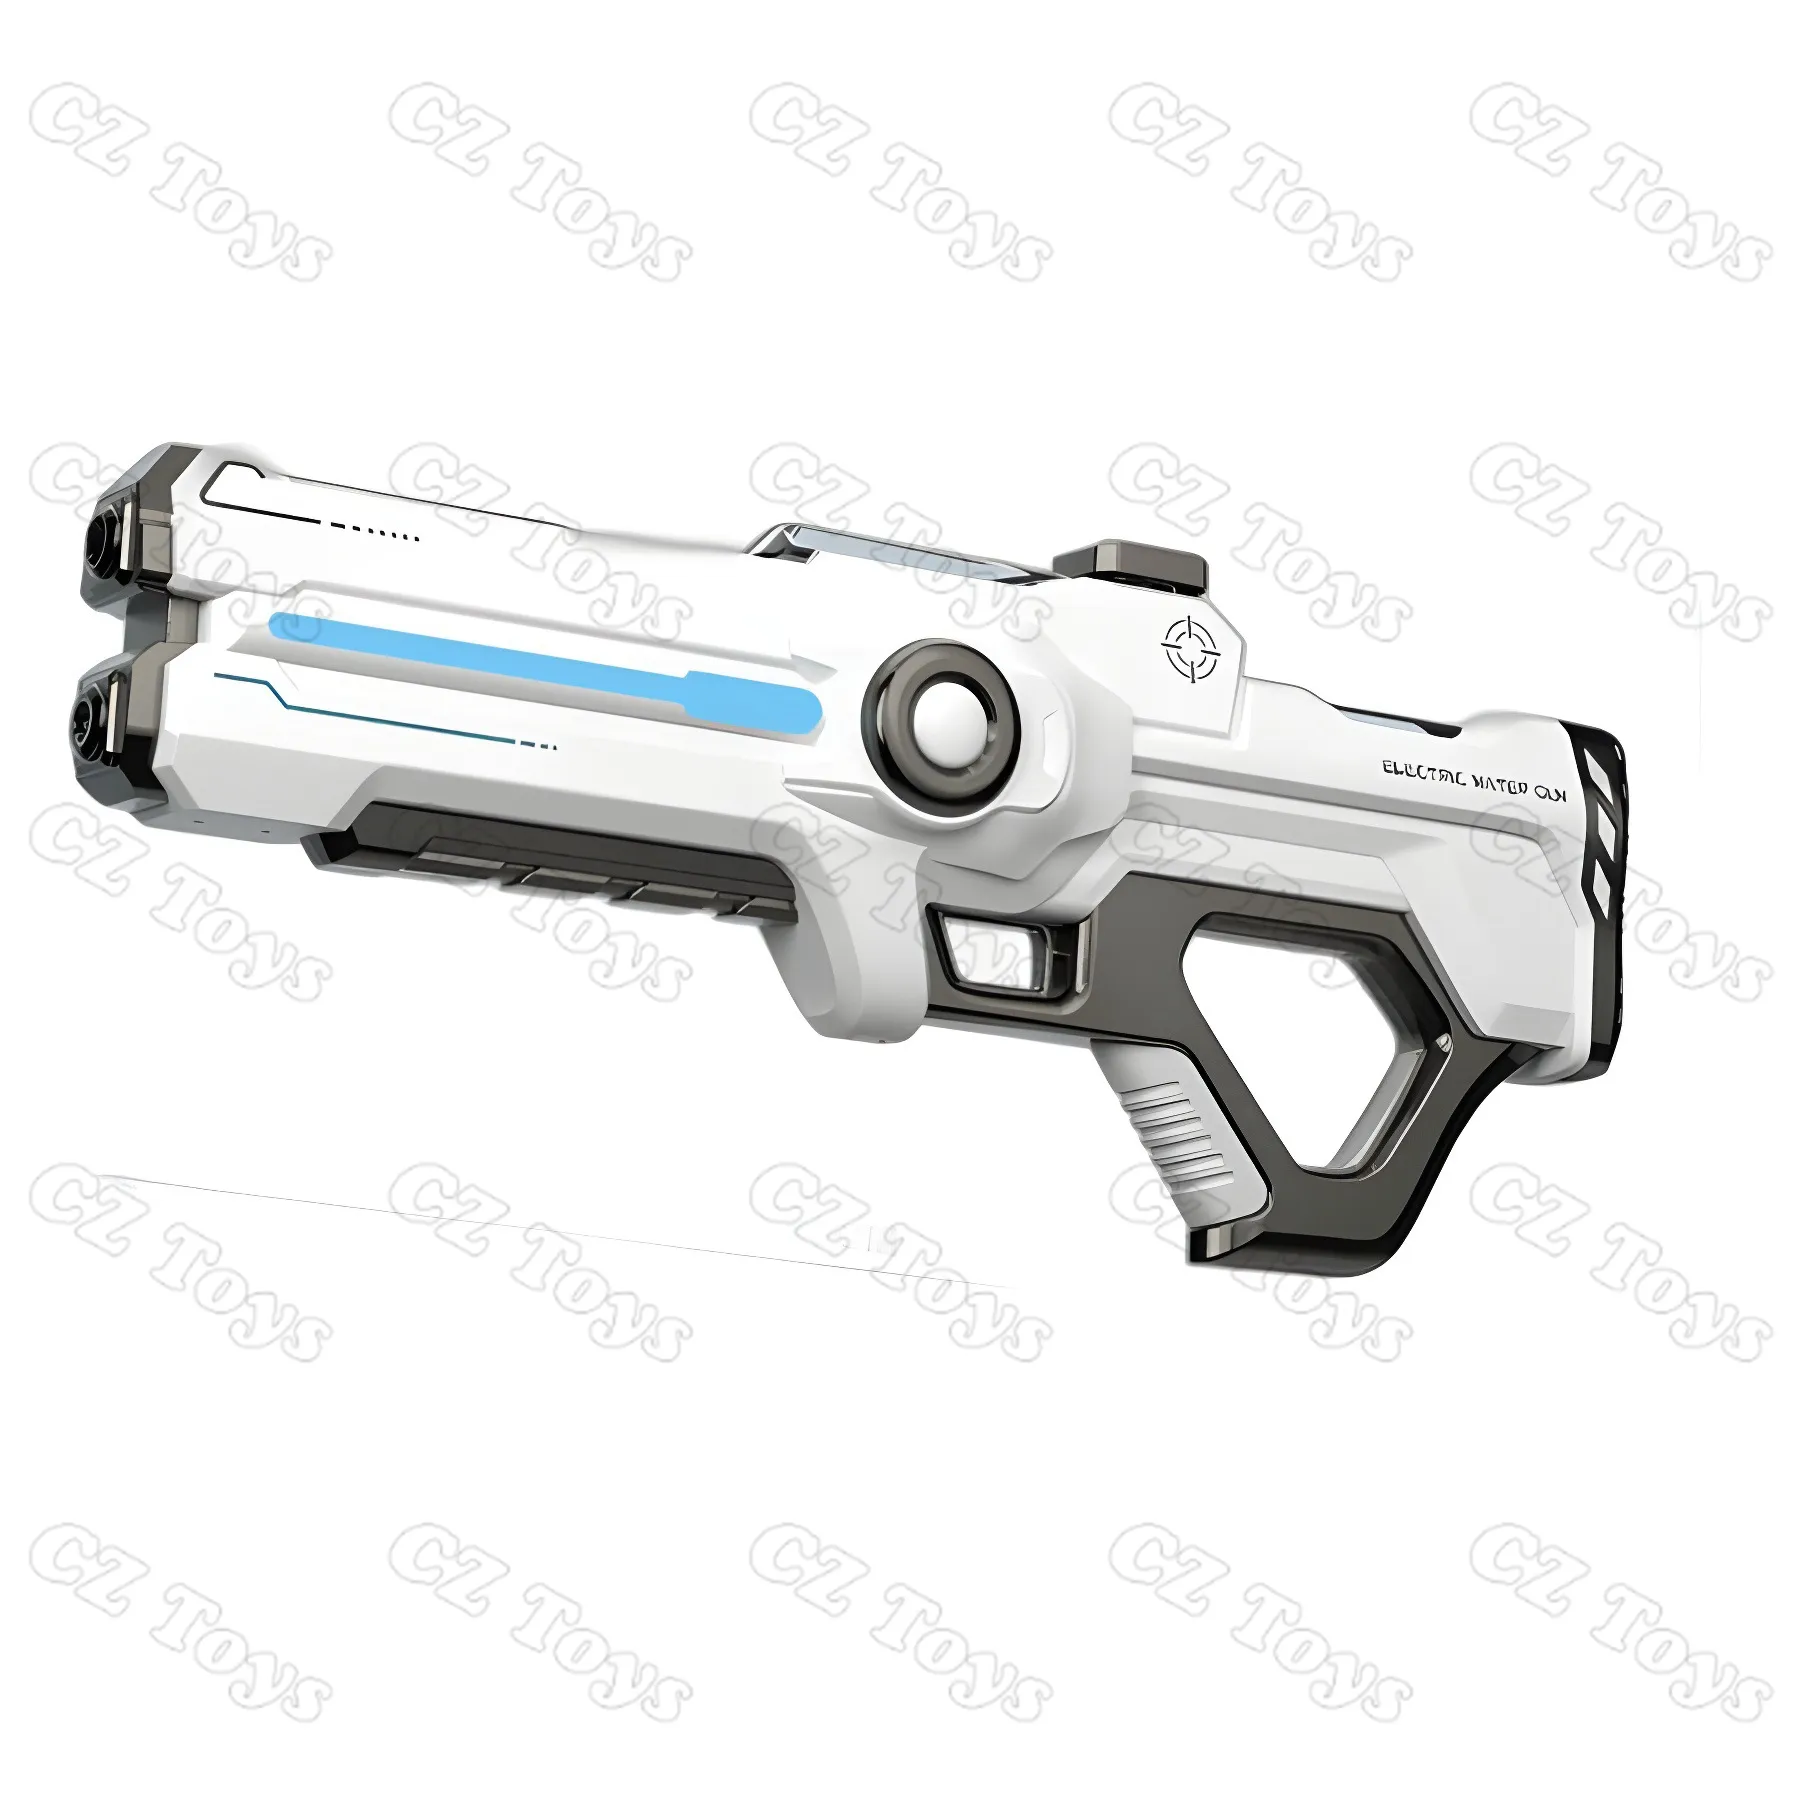 New design guns chargeable interactive toys Power Sound Laser Tag Gun for Children Warrior Battle Game toys outdoor